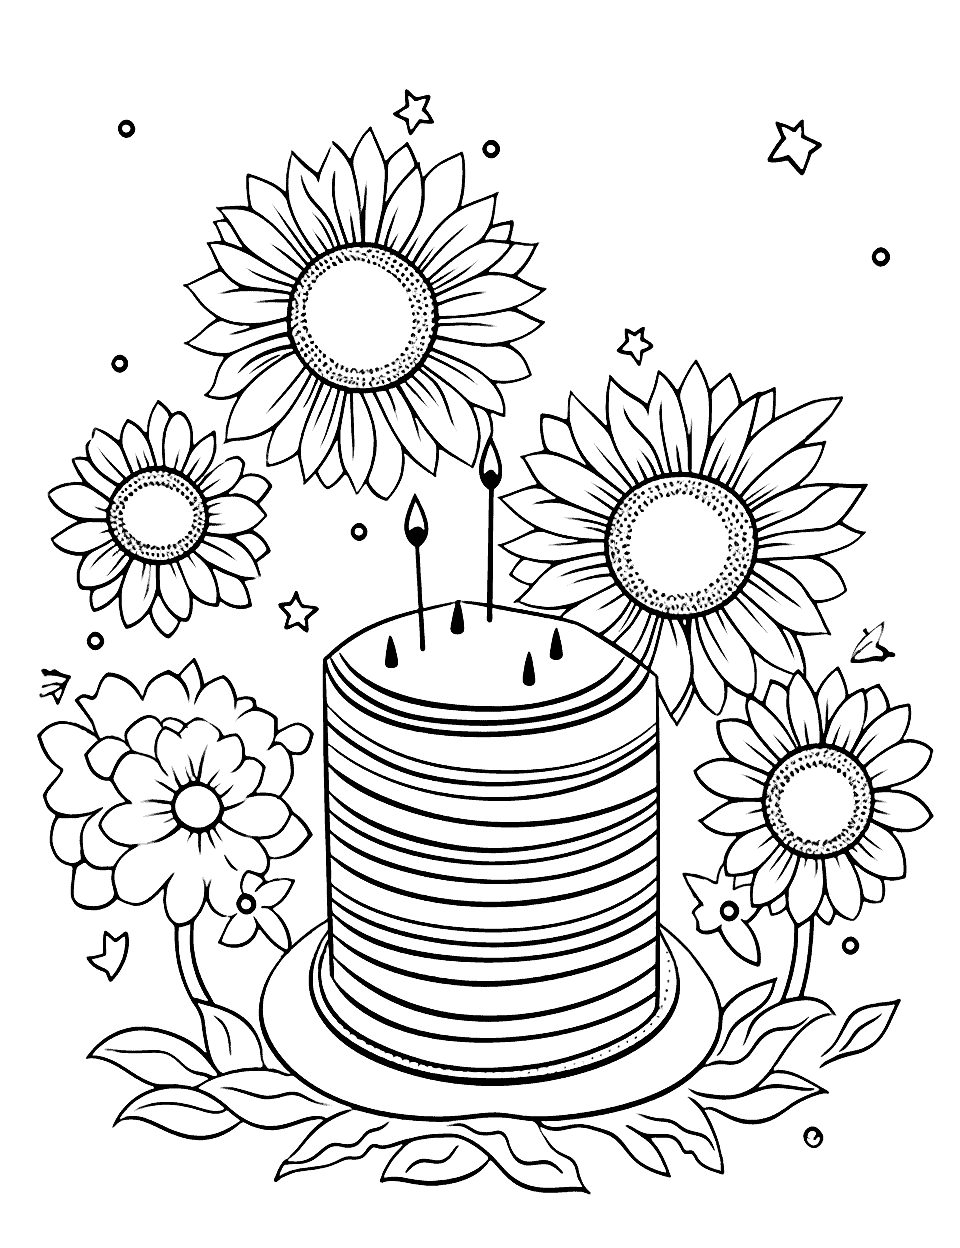 Sunflower's Sunny Birthday Happy Coloring Page - A bright sunflower surrounded by buzzing bees celebrating its birthday.